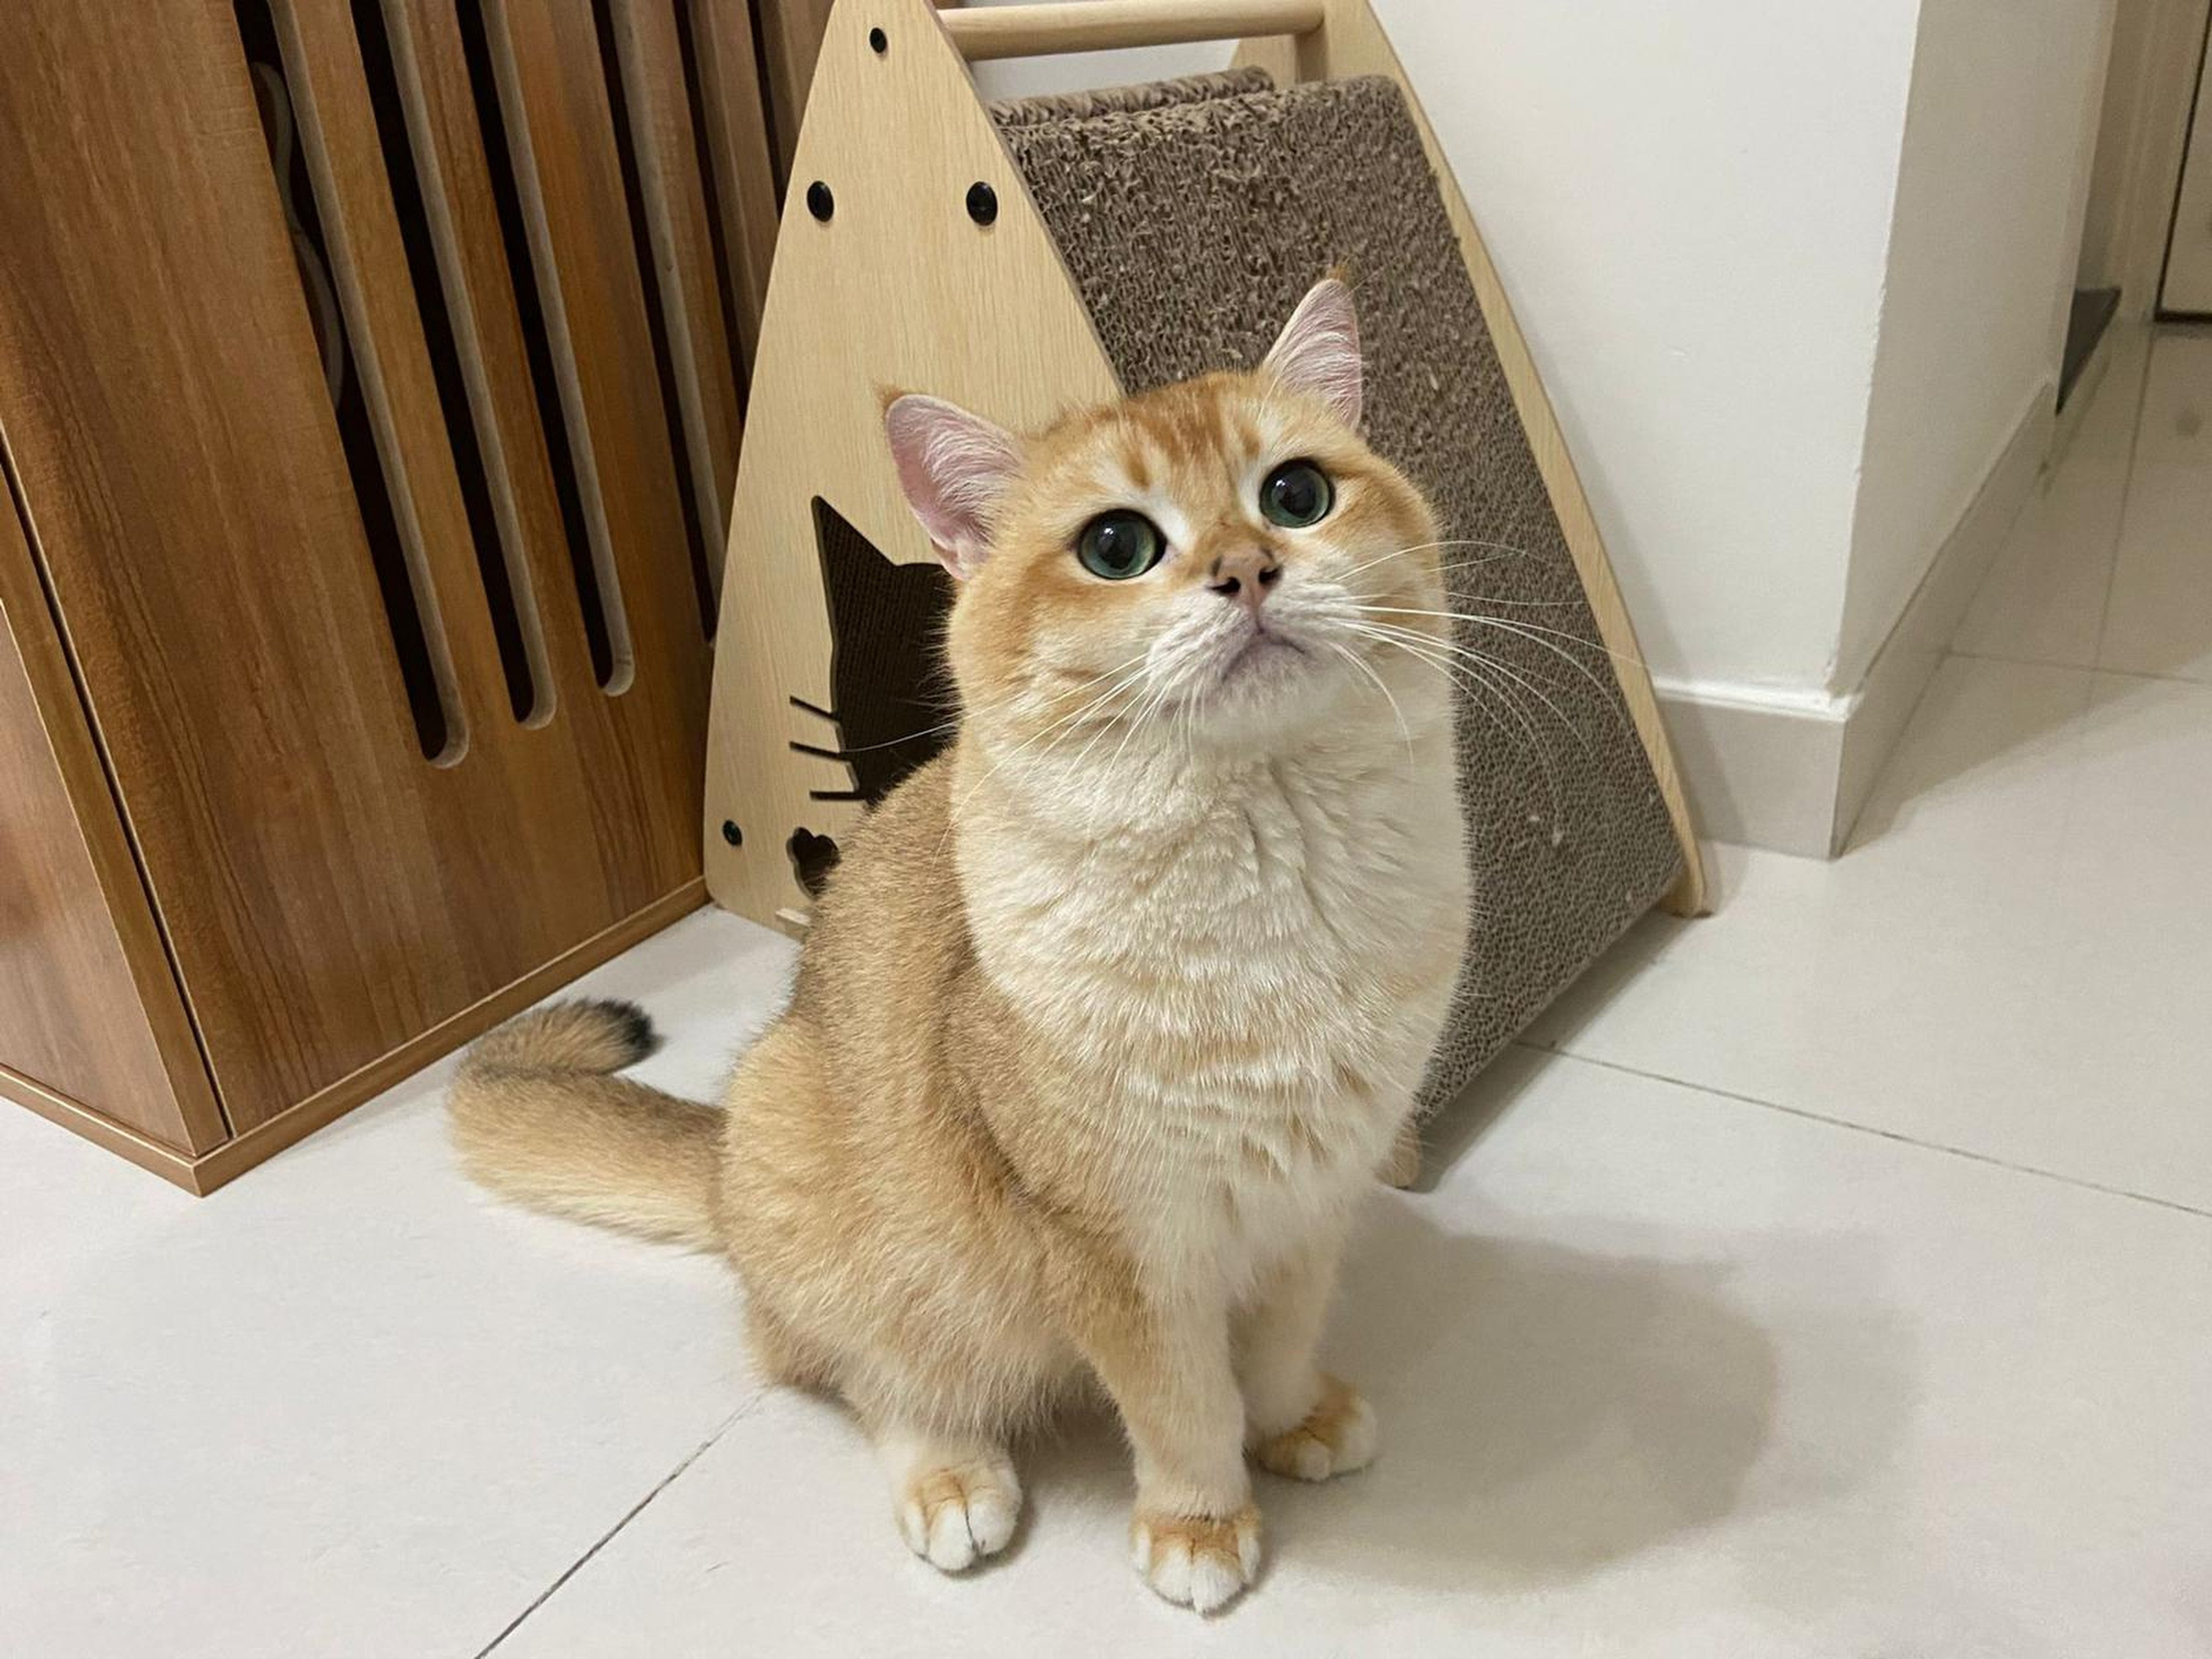 A Hong Kong pet owner says her British shorthair arrived from mainland China last year without going through the mandatory four-month quarantine. Photo: Handout